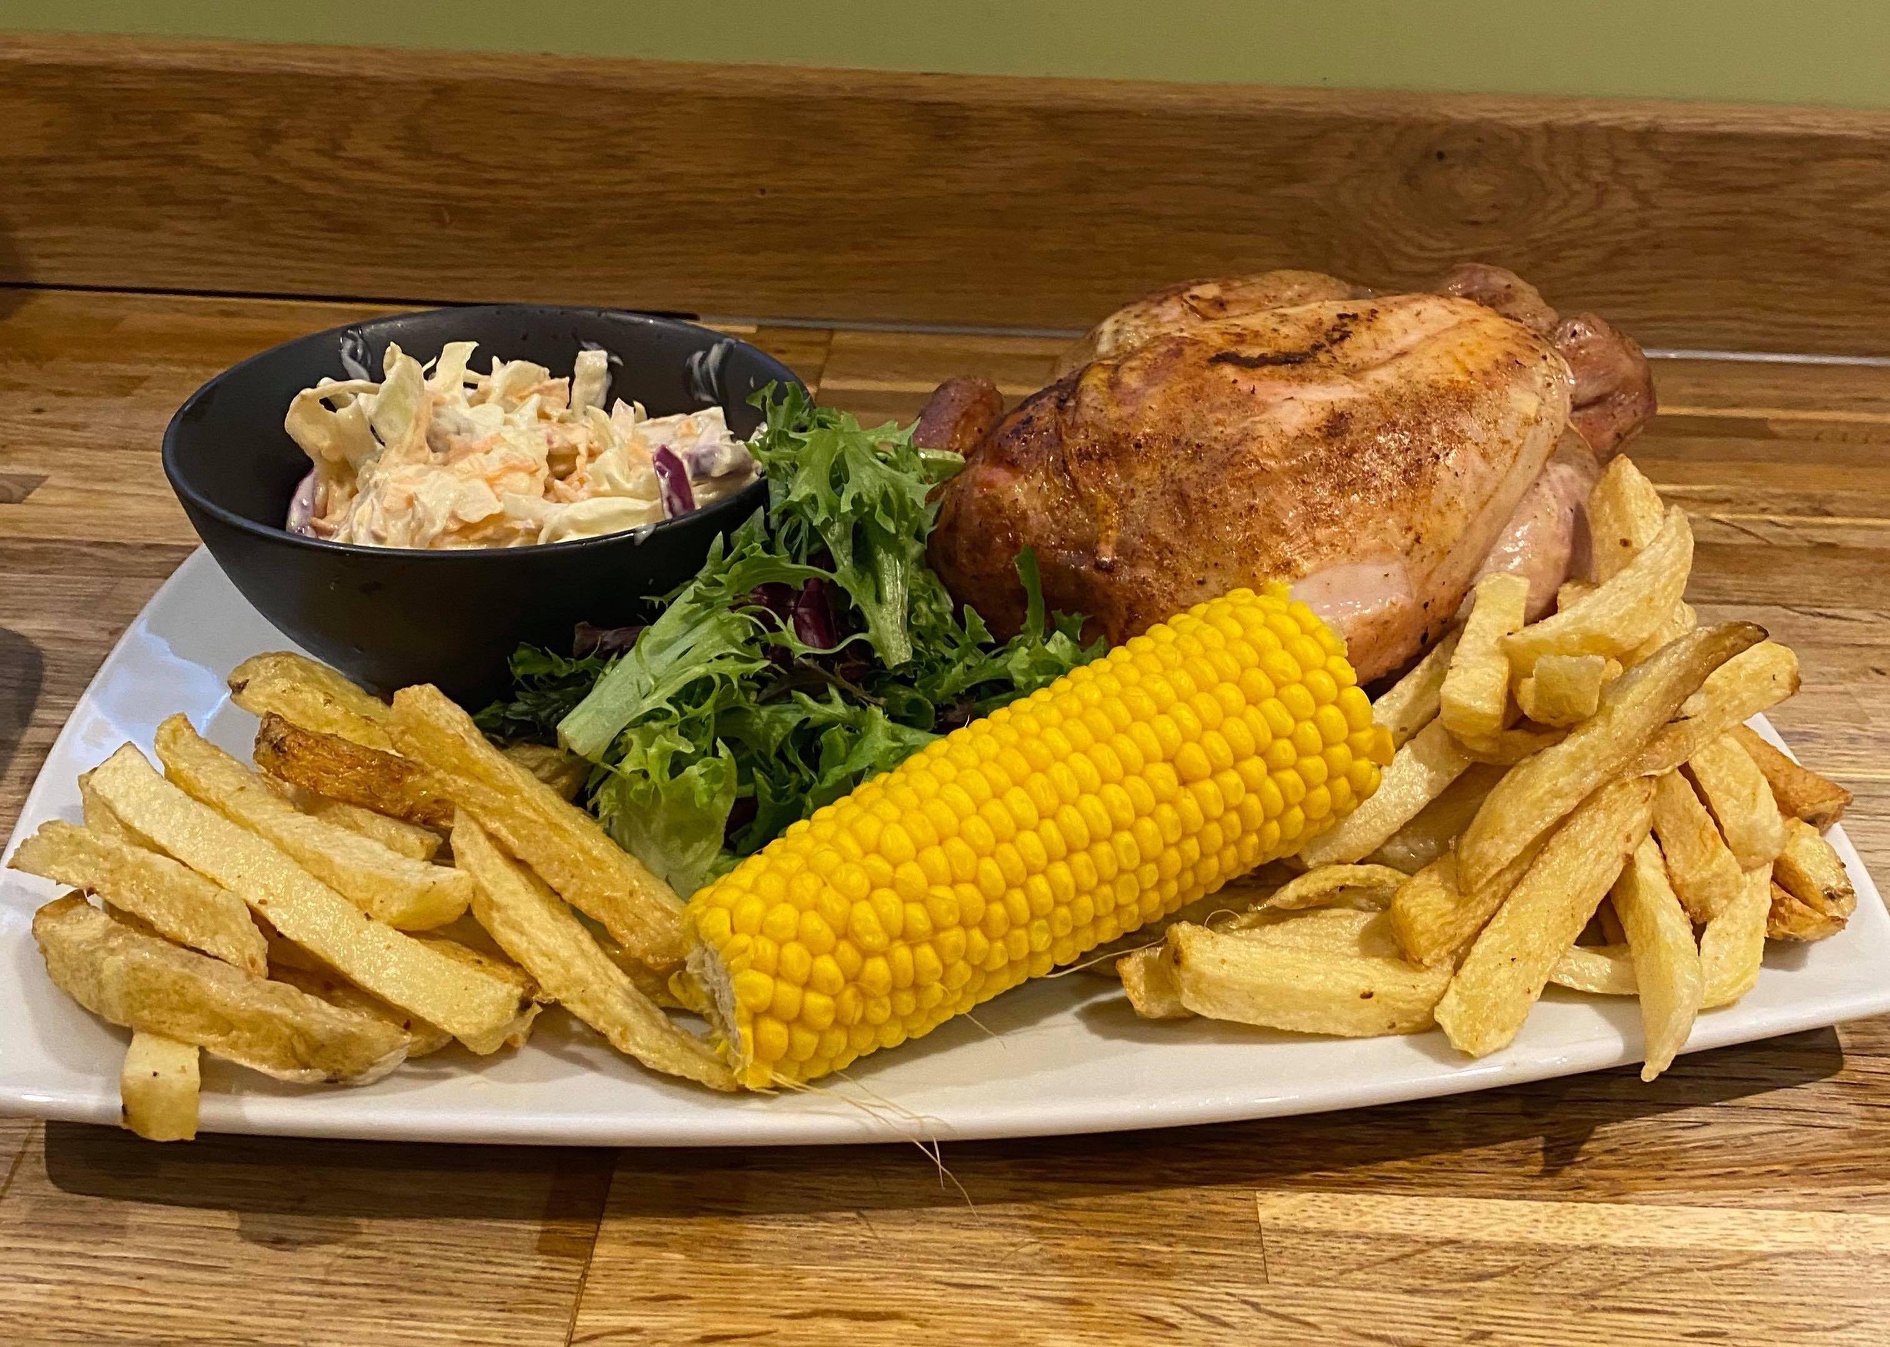 FOOD | The Bay Horse launches Piri Piri Chicken menu – Available for delivery on Saturday